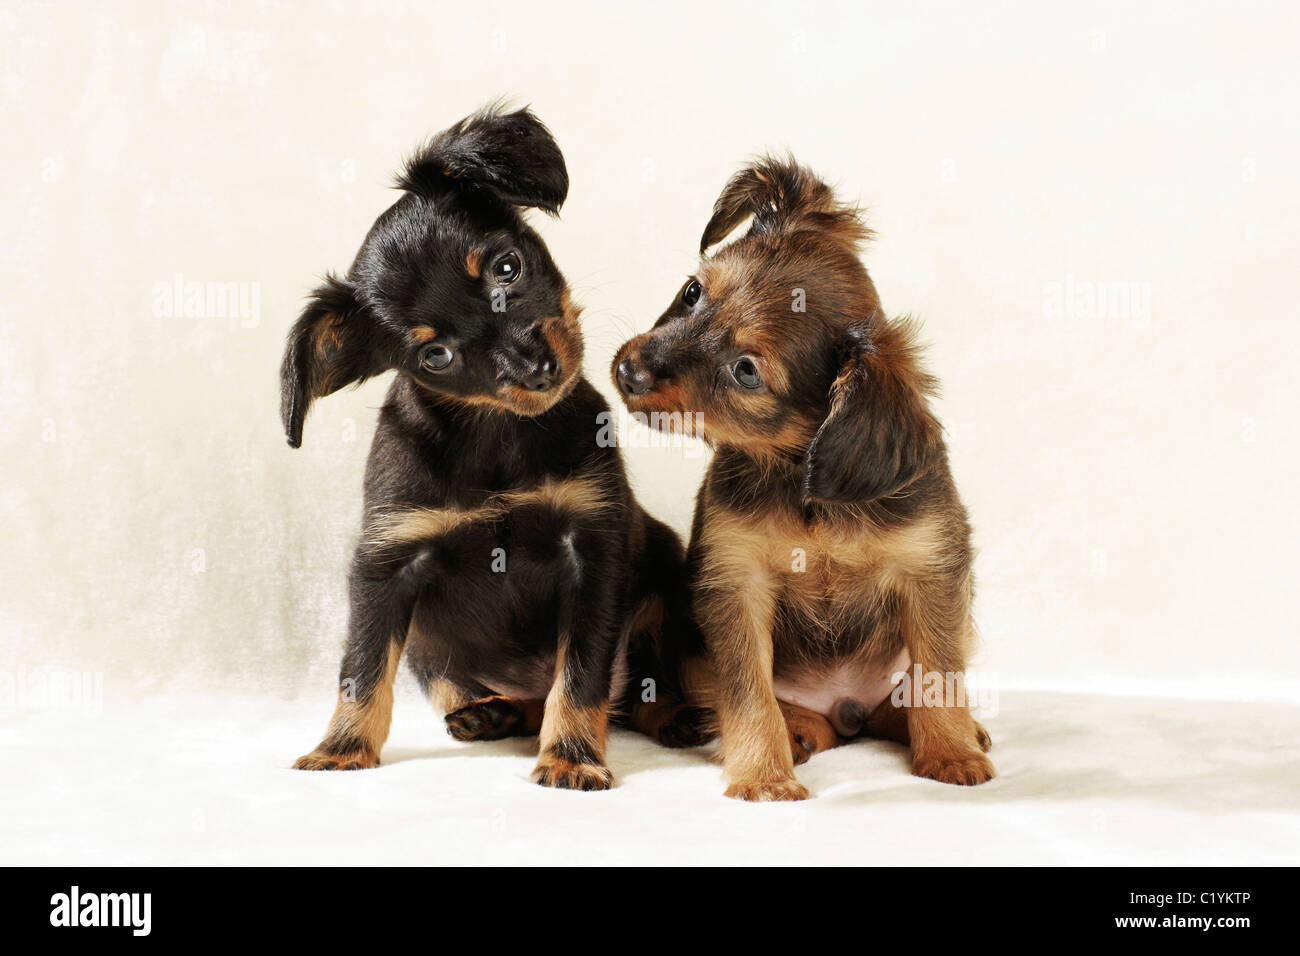 Russian Toy Terrier dog two puppies sitting Stock Photo